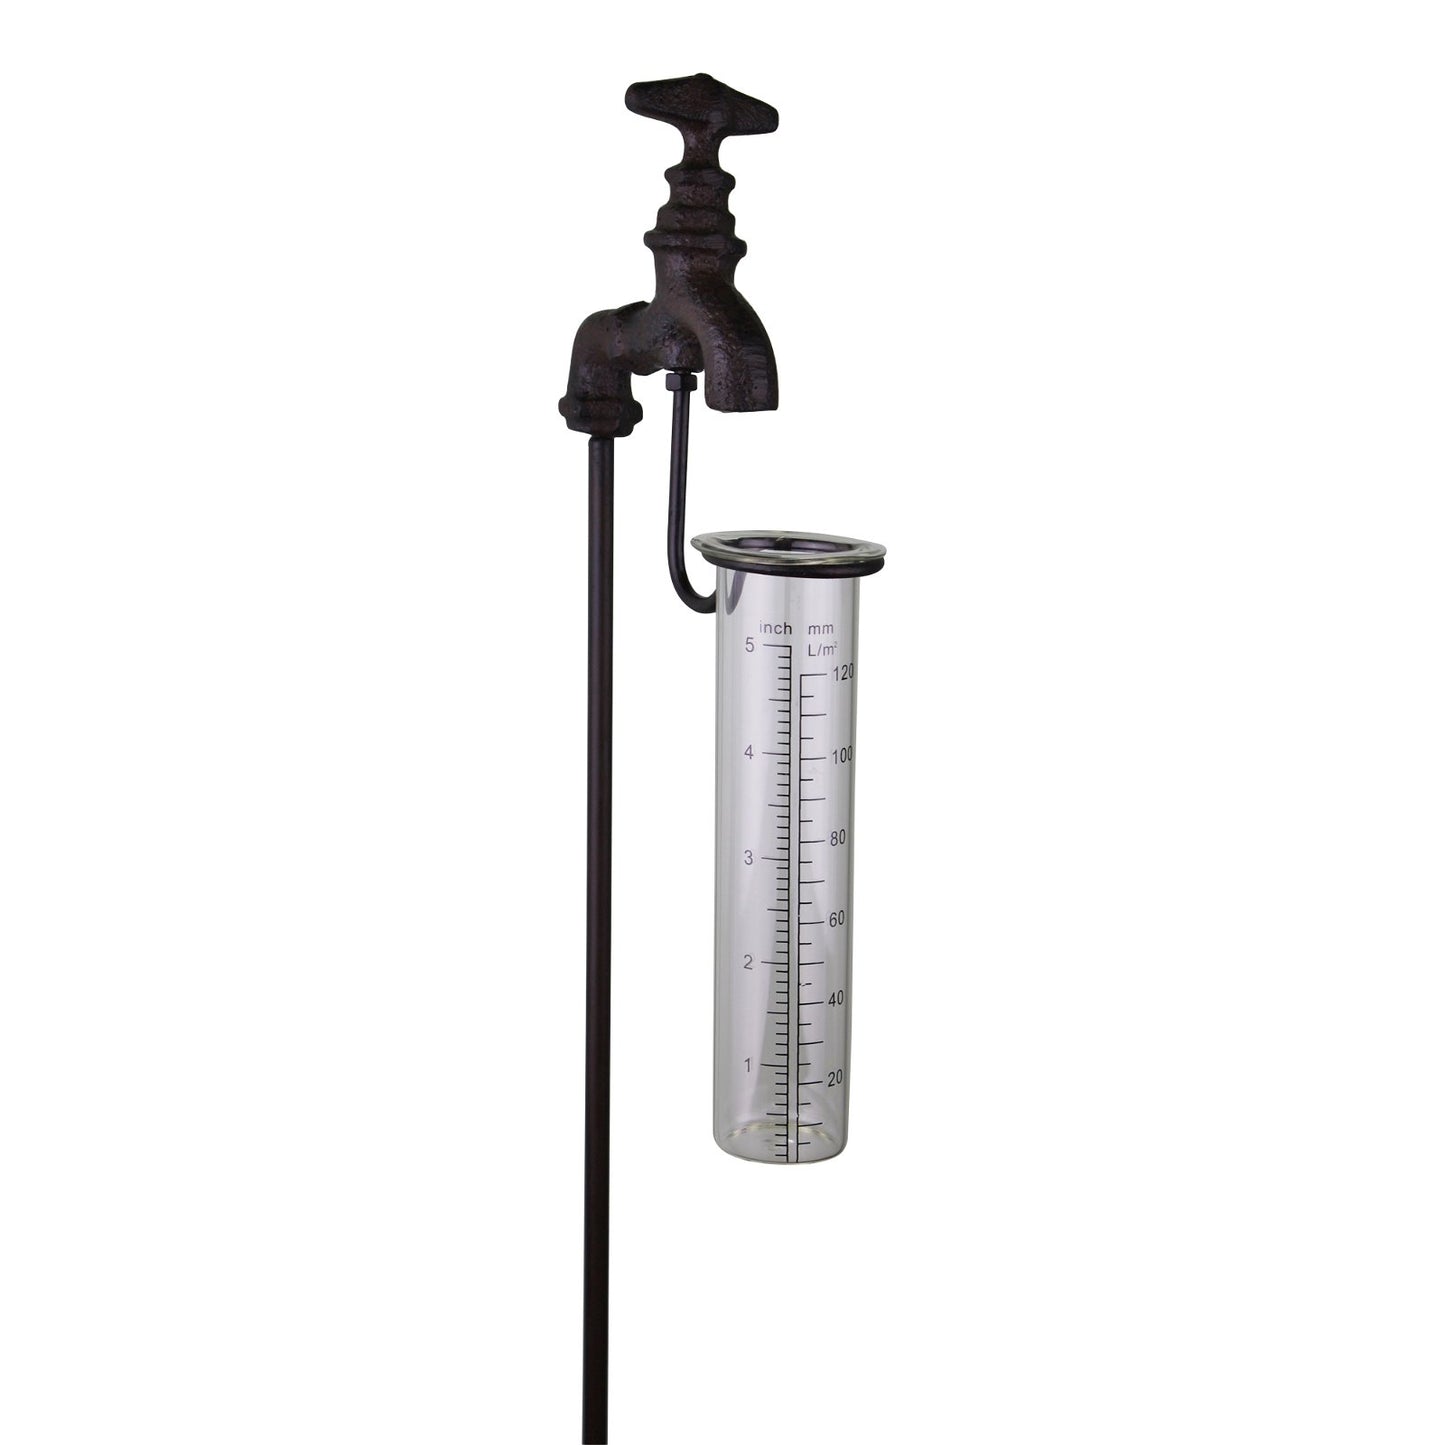 Cast Iron and Glass Garden Rain Gauge - Outside Tap Design (UK Only)